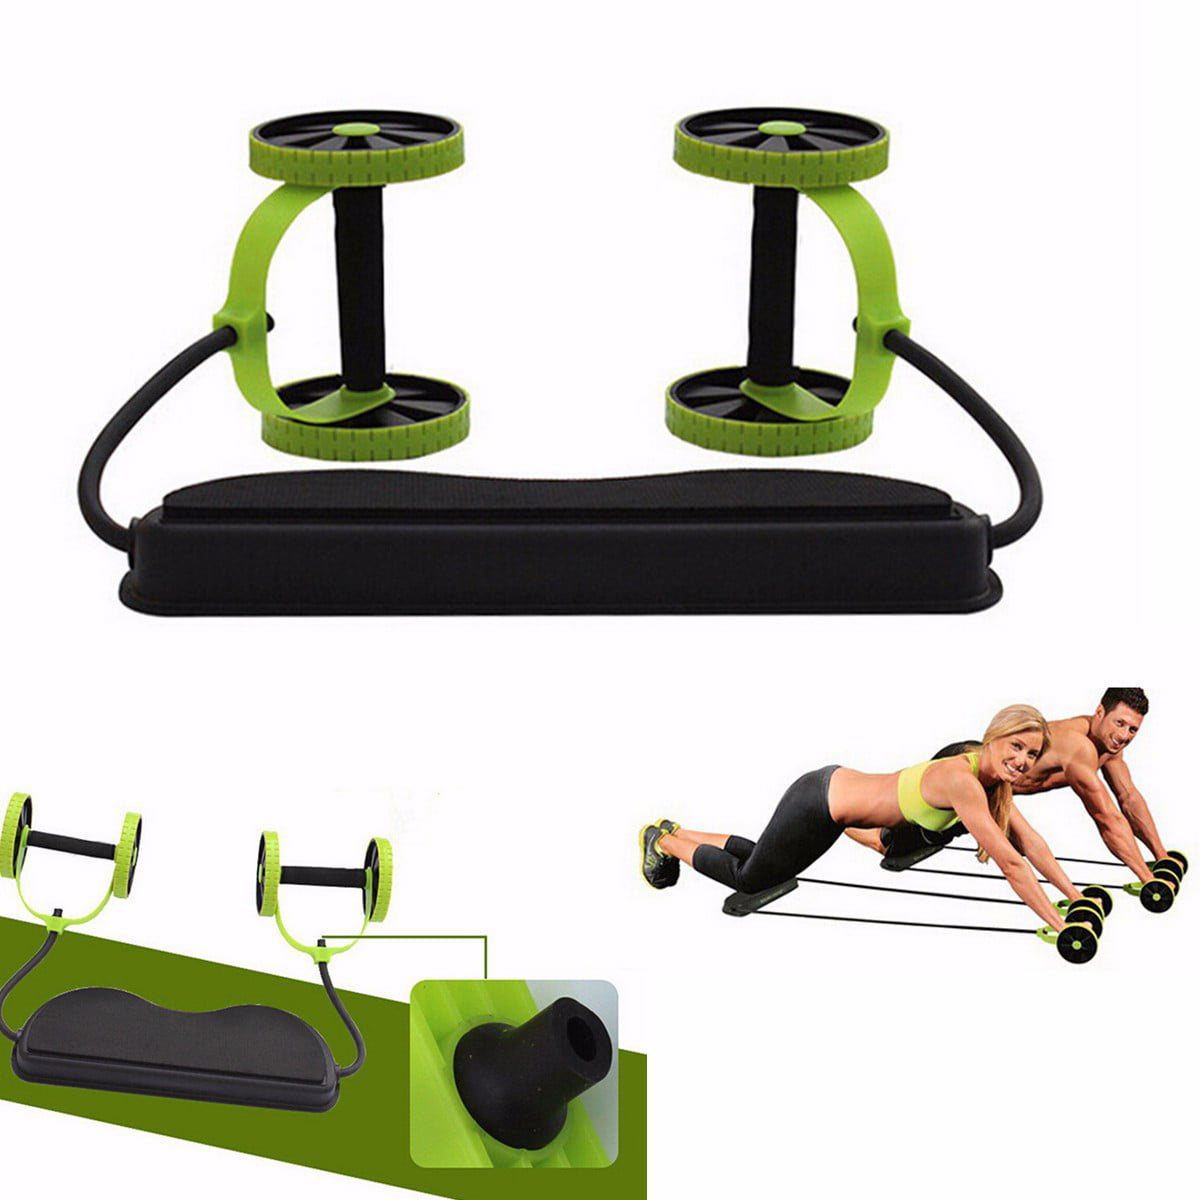 Abdominal Exercise Ab Roller Body Fitness Gym Training Abs Wheel Knee Pad Mat